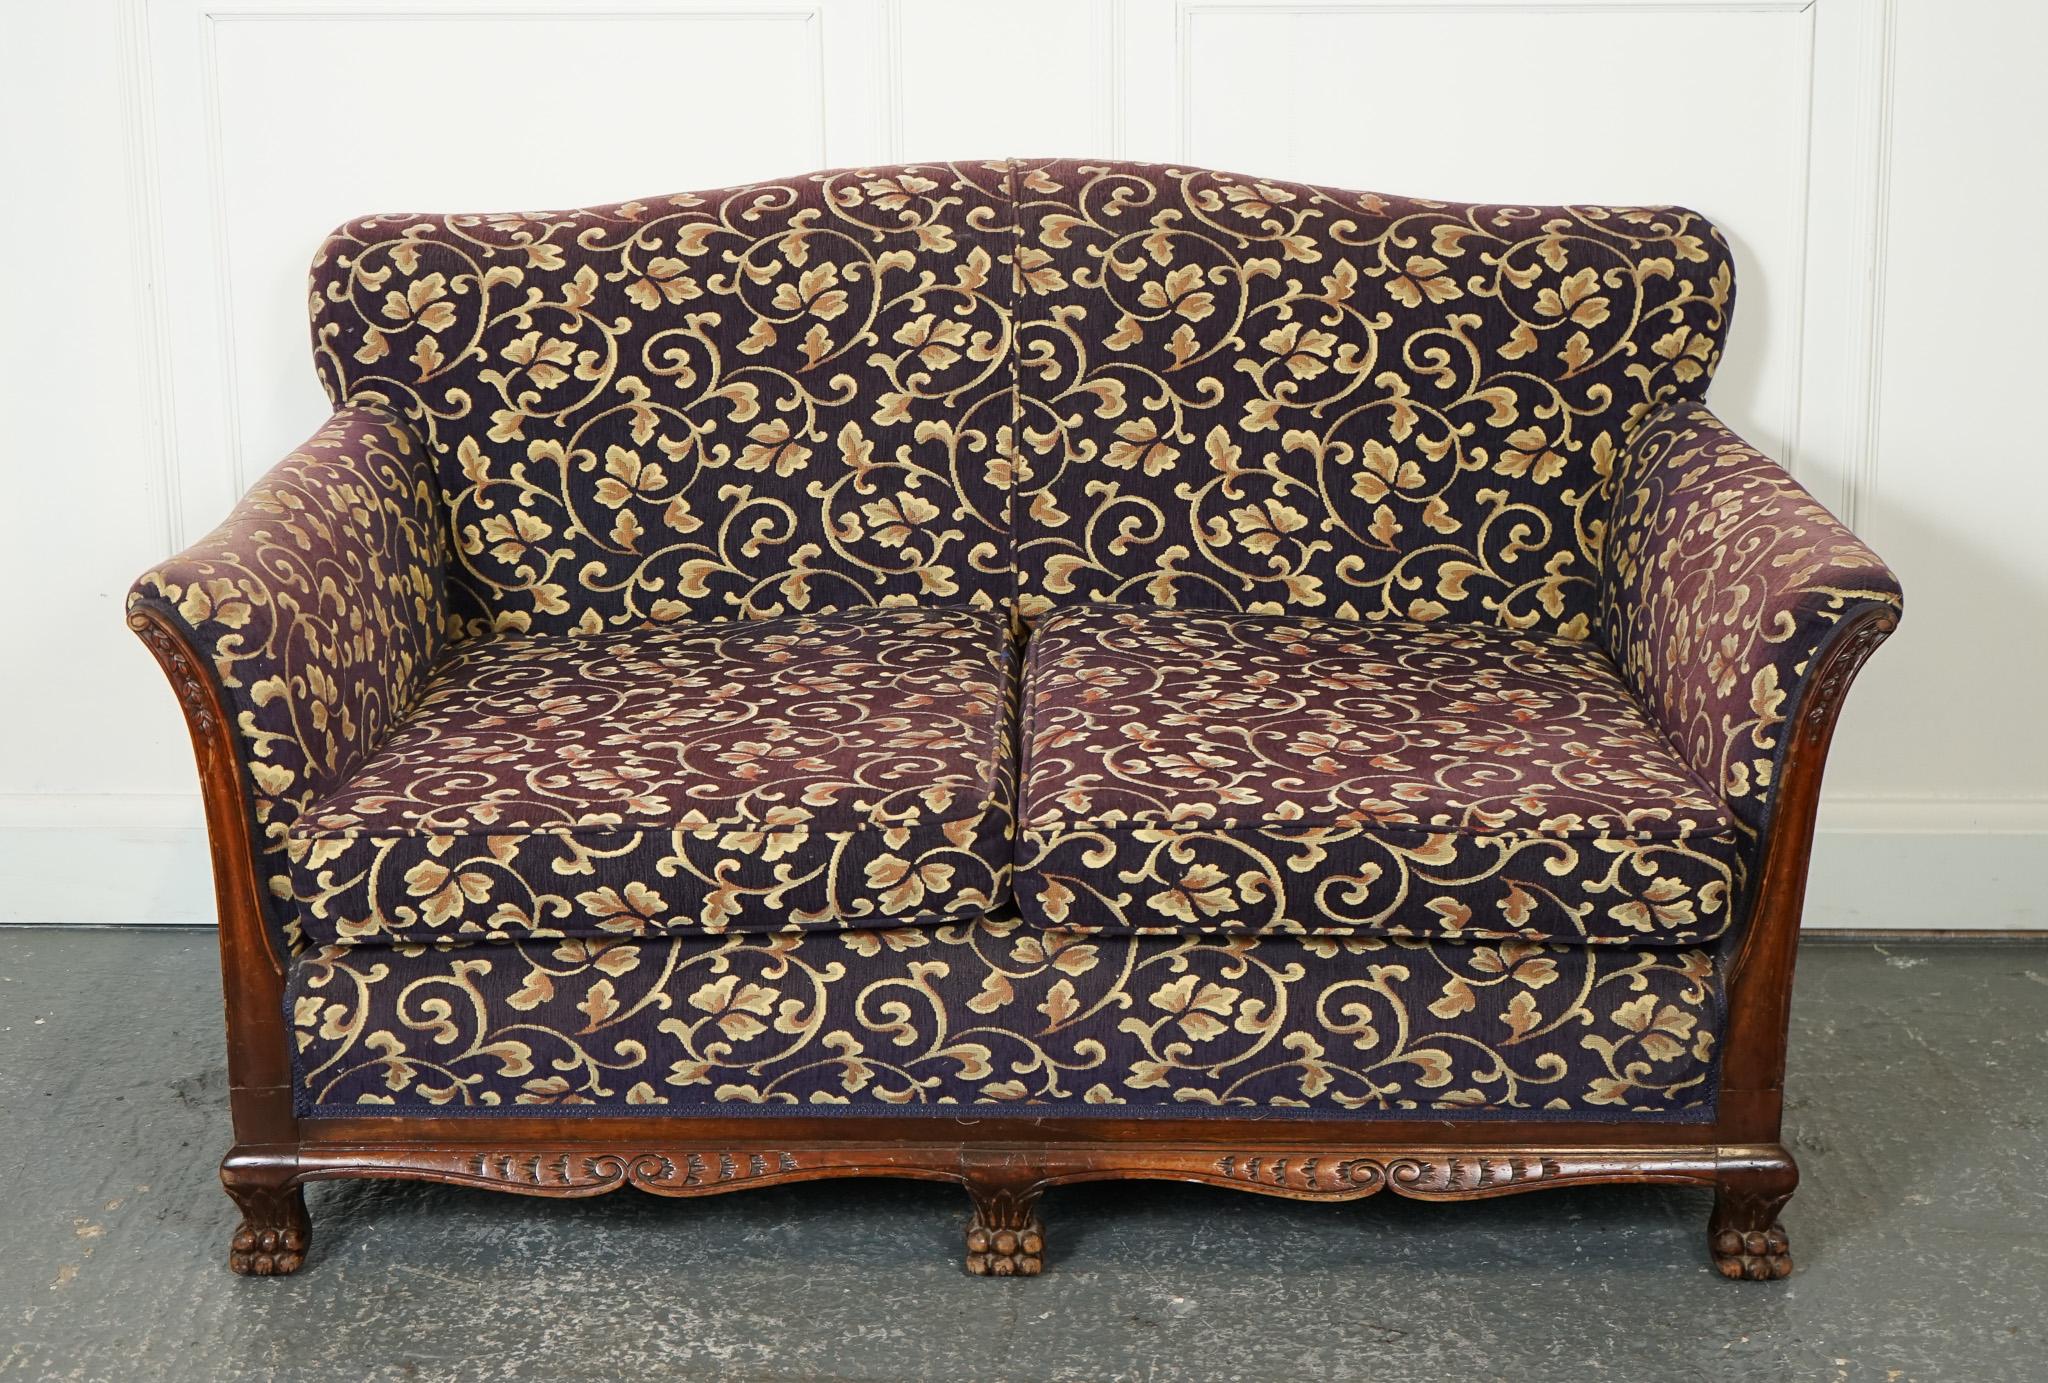 
We are delighted to offer for sale this Victorian Fabric Set Of Sofa And Armchairs.

The Victorian Fabric Bergere Suite Sofa and Two Armchairs Upholstery Project involves refurbishing a set of antique furniture. The suite includes a sofa and two